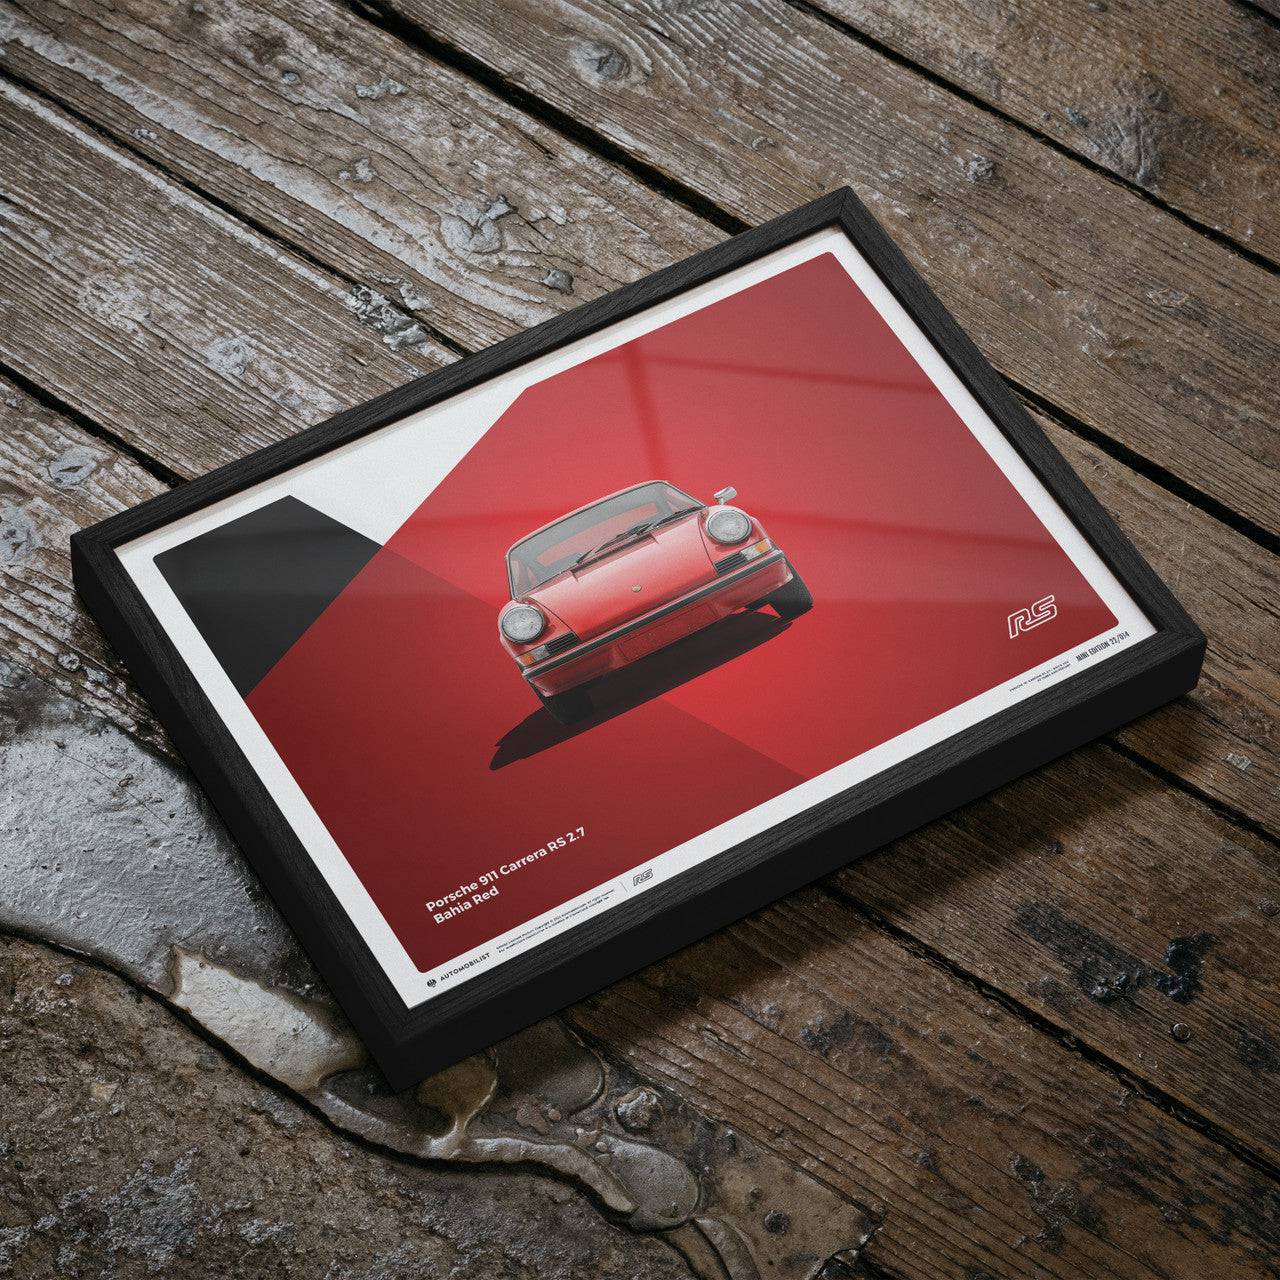 Porsche 911 RS - Red - Limited Poster